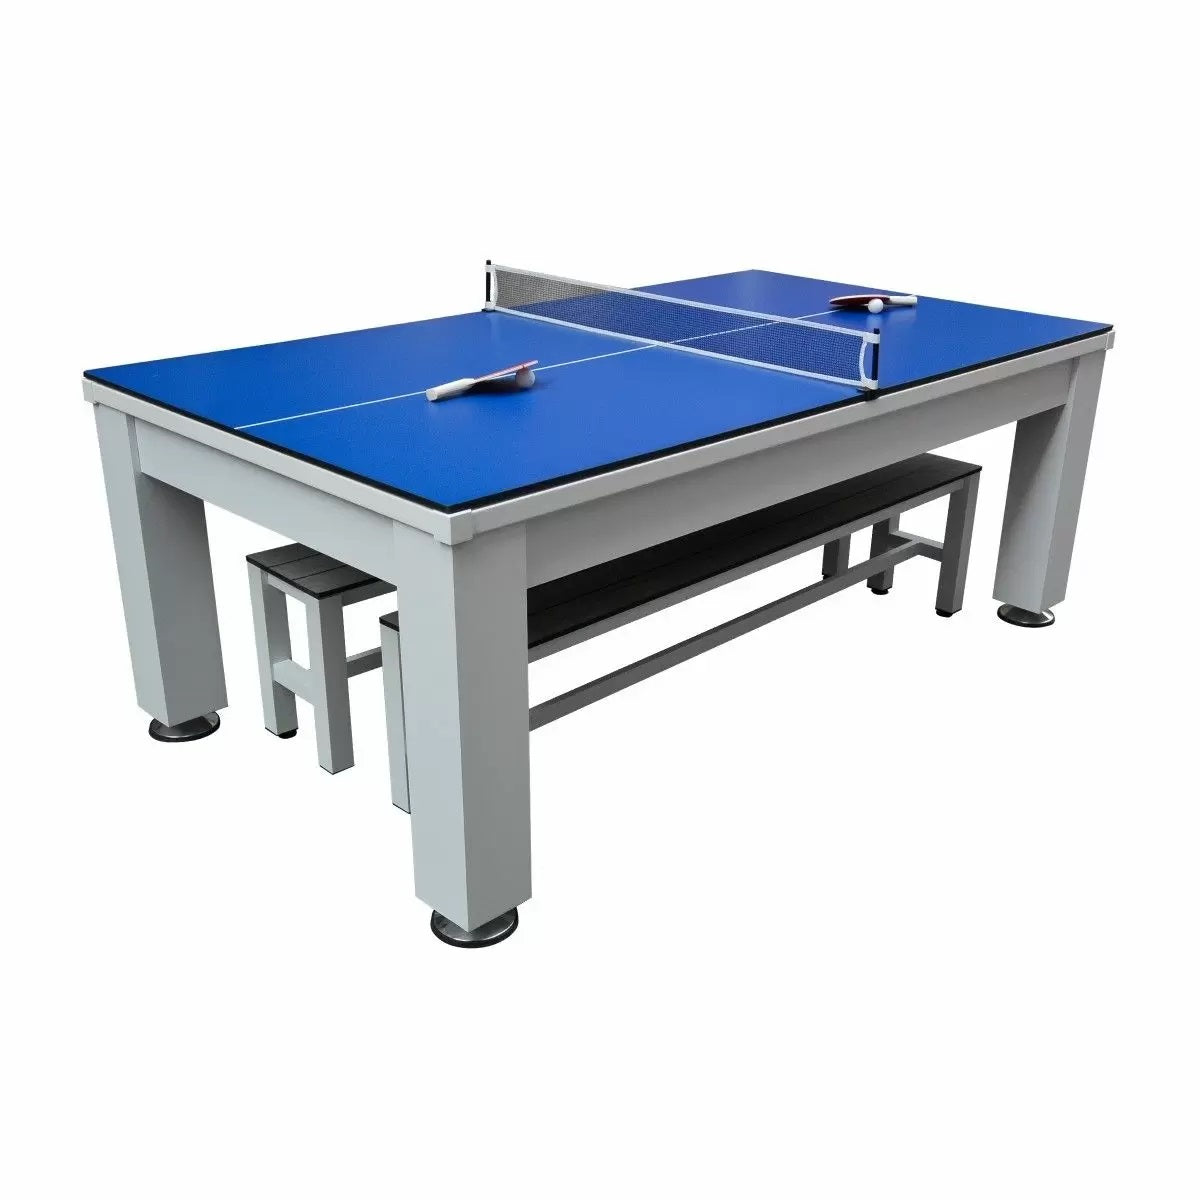 Imperial Esterno Outdoor Table Dining Top and Tennis Table tennis